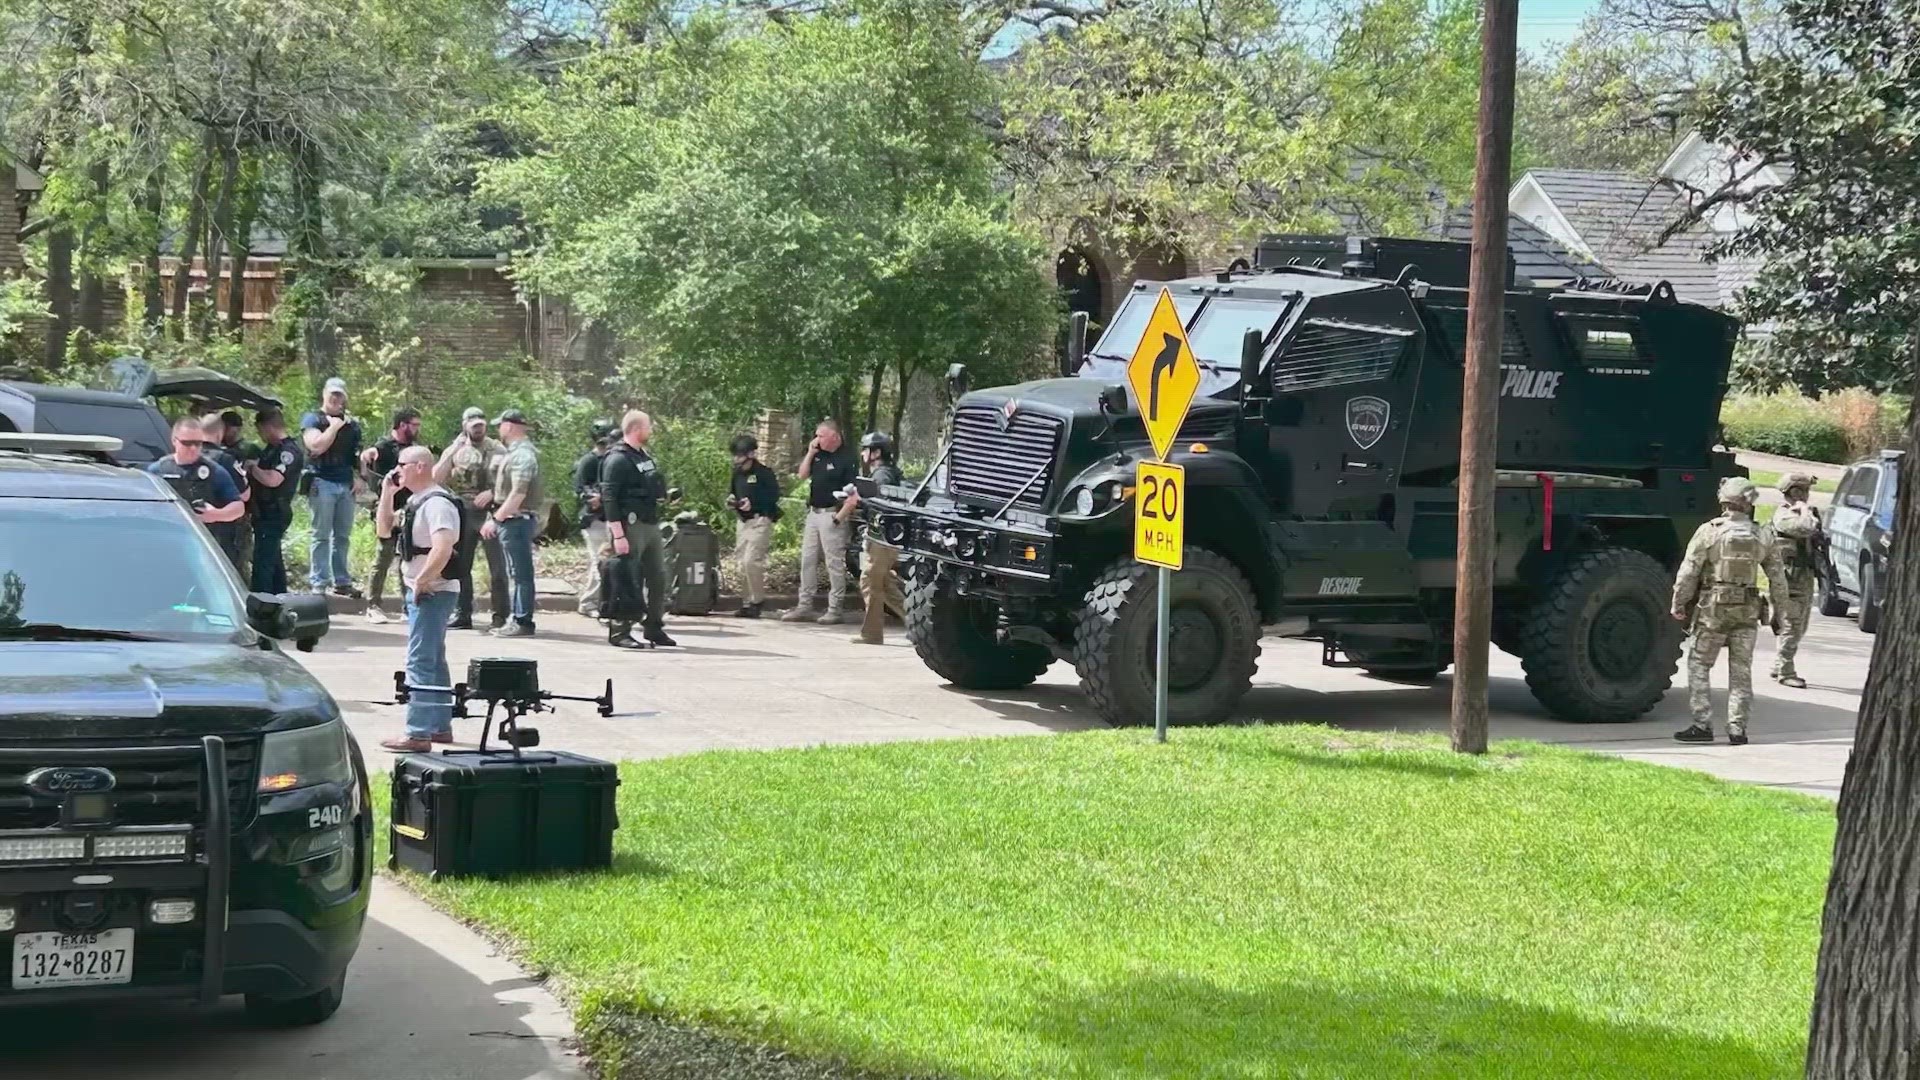 A pursuit from Dallas that ended in Colleyville led to a 3-hour SWAT standoff Friday, sources say.